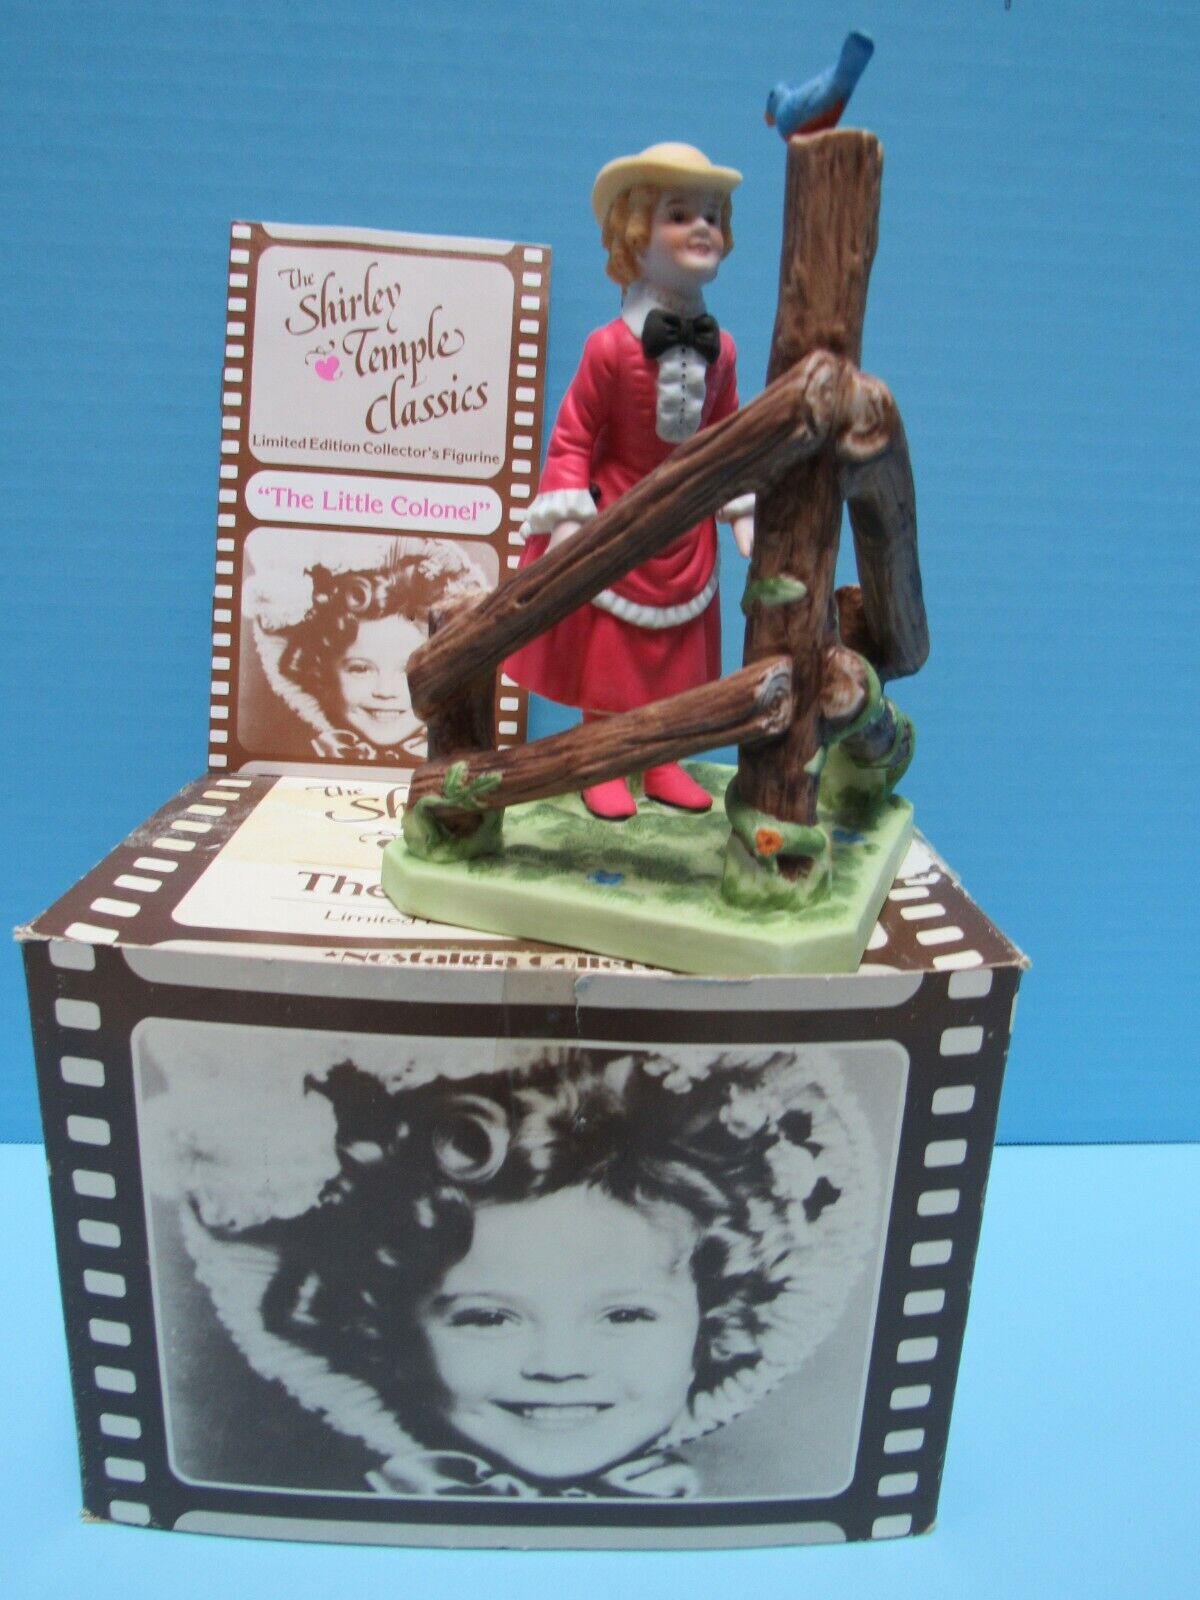 VTG. 1985 SHIRLEY TEMPLE THE LITTLE COLONEL PORCELAIN FIGURINE W/BOX LIMITED ED.